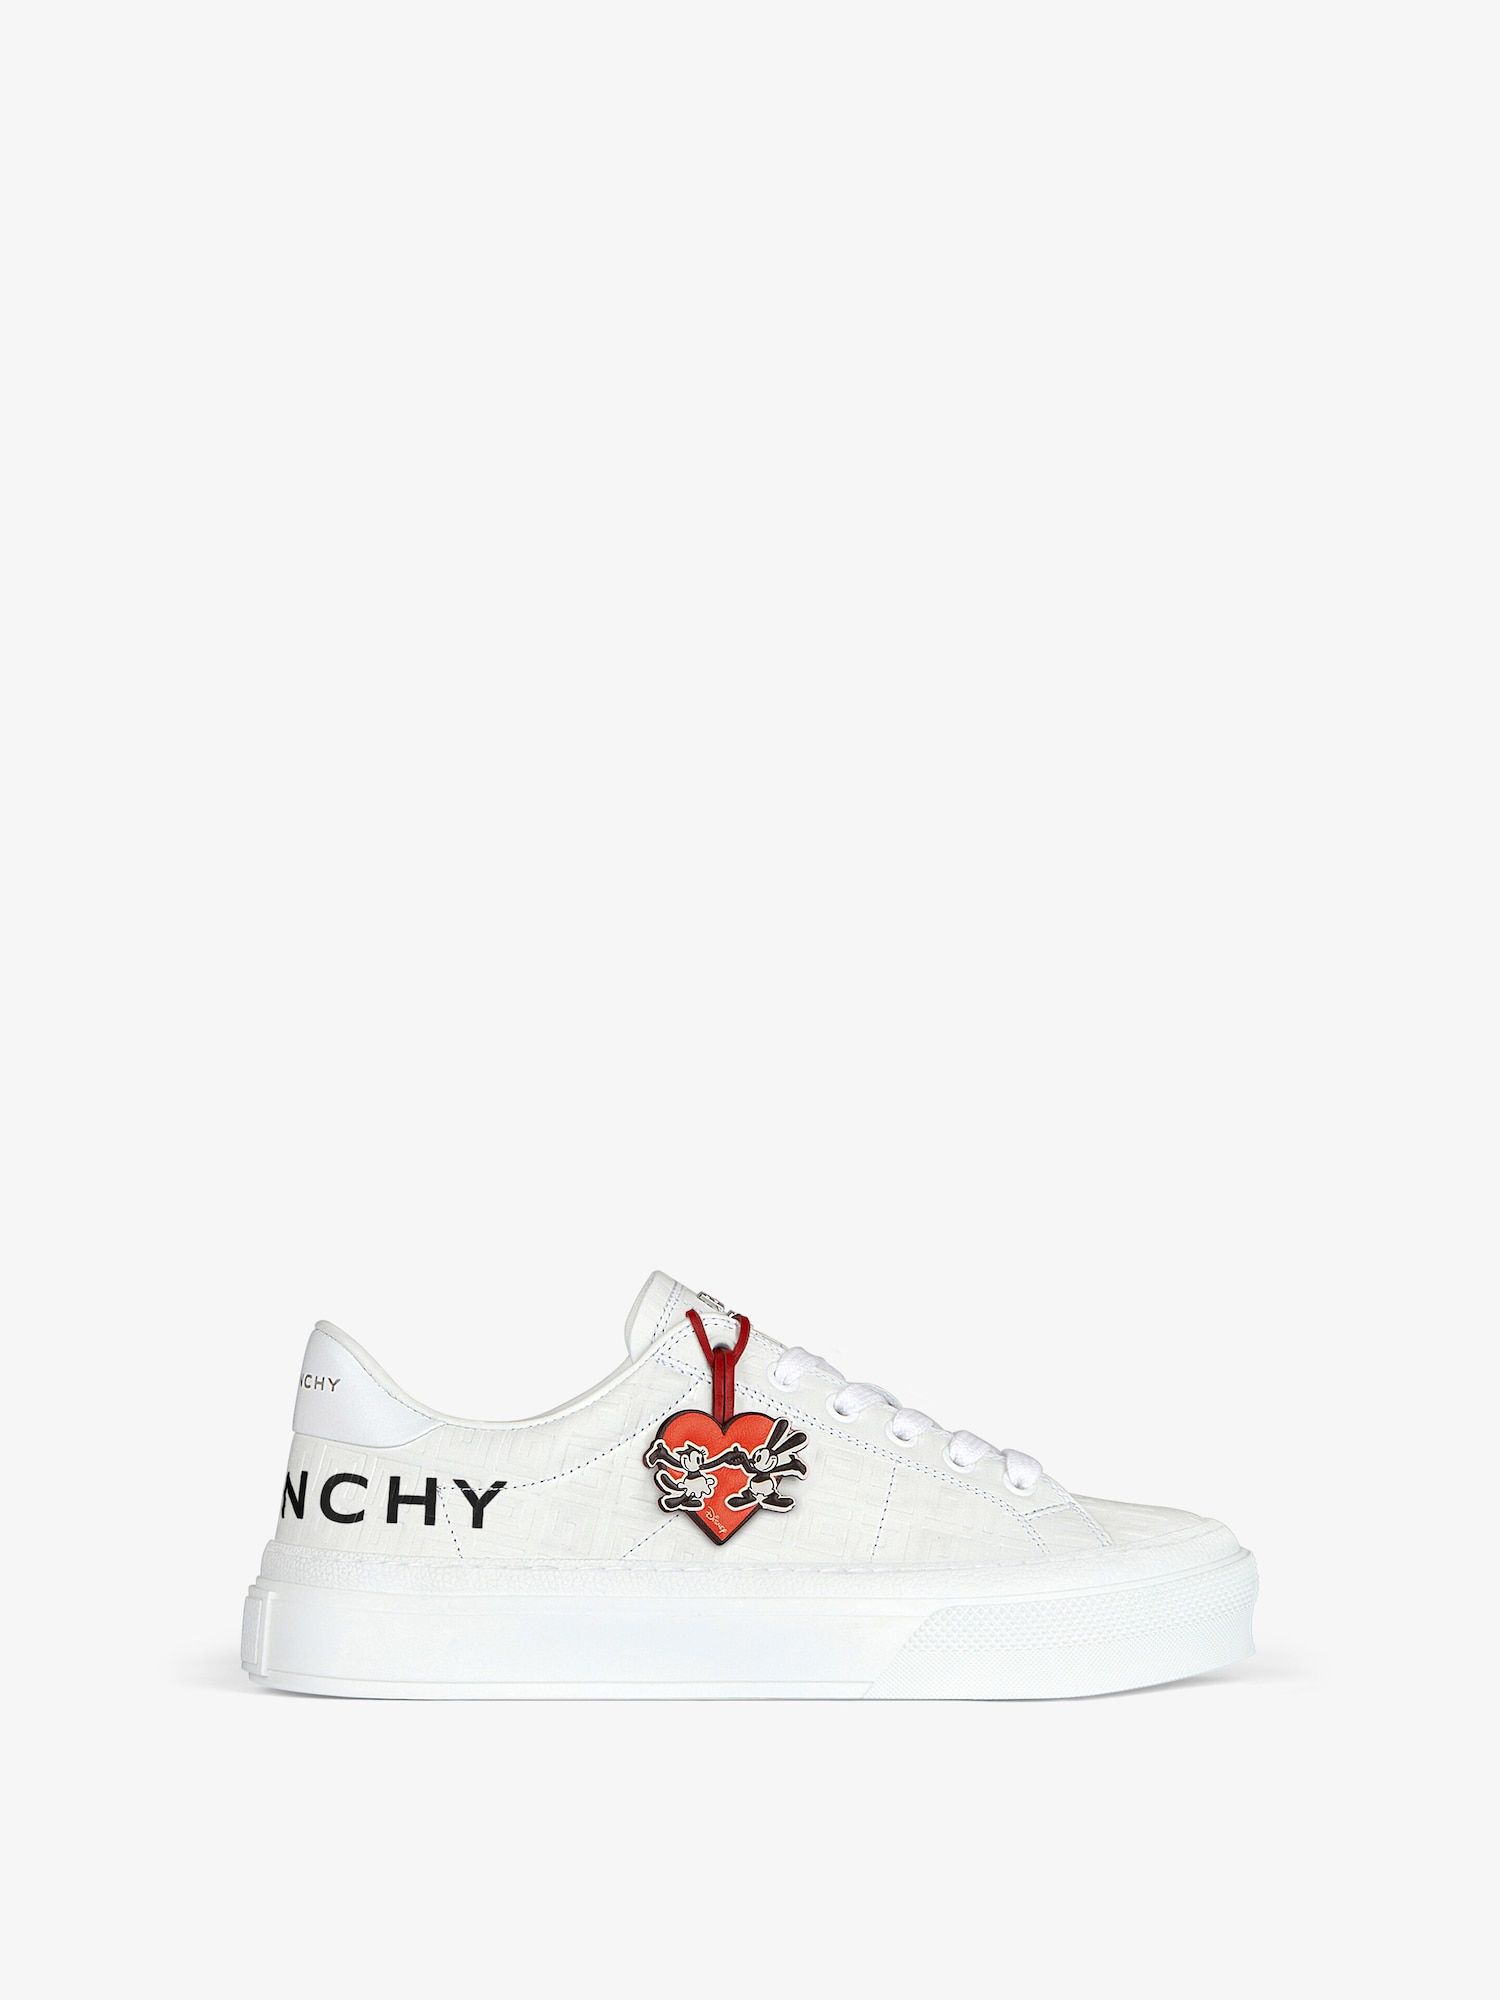 Givenchy Teams Up With Disney